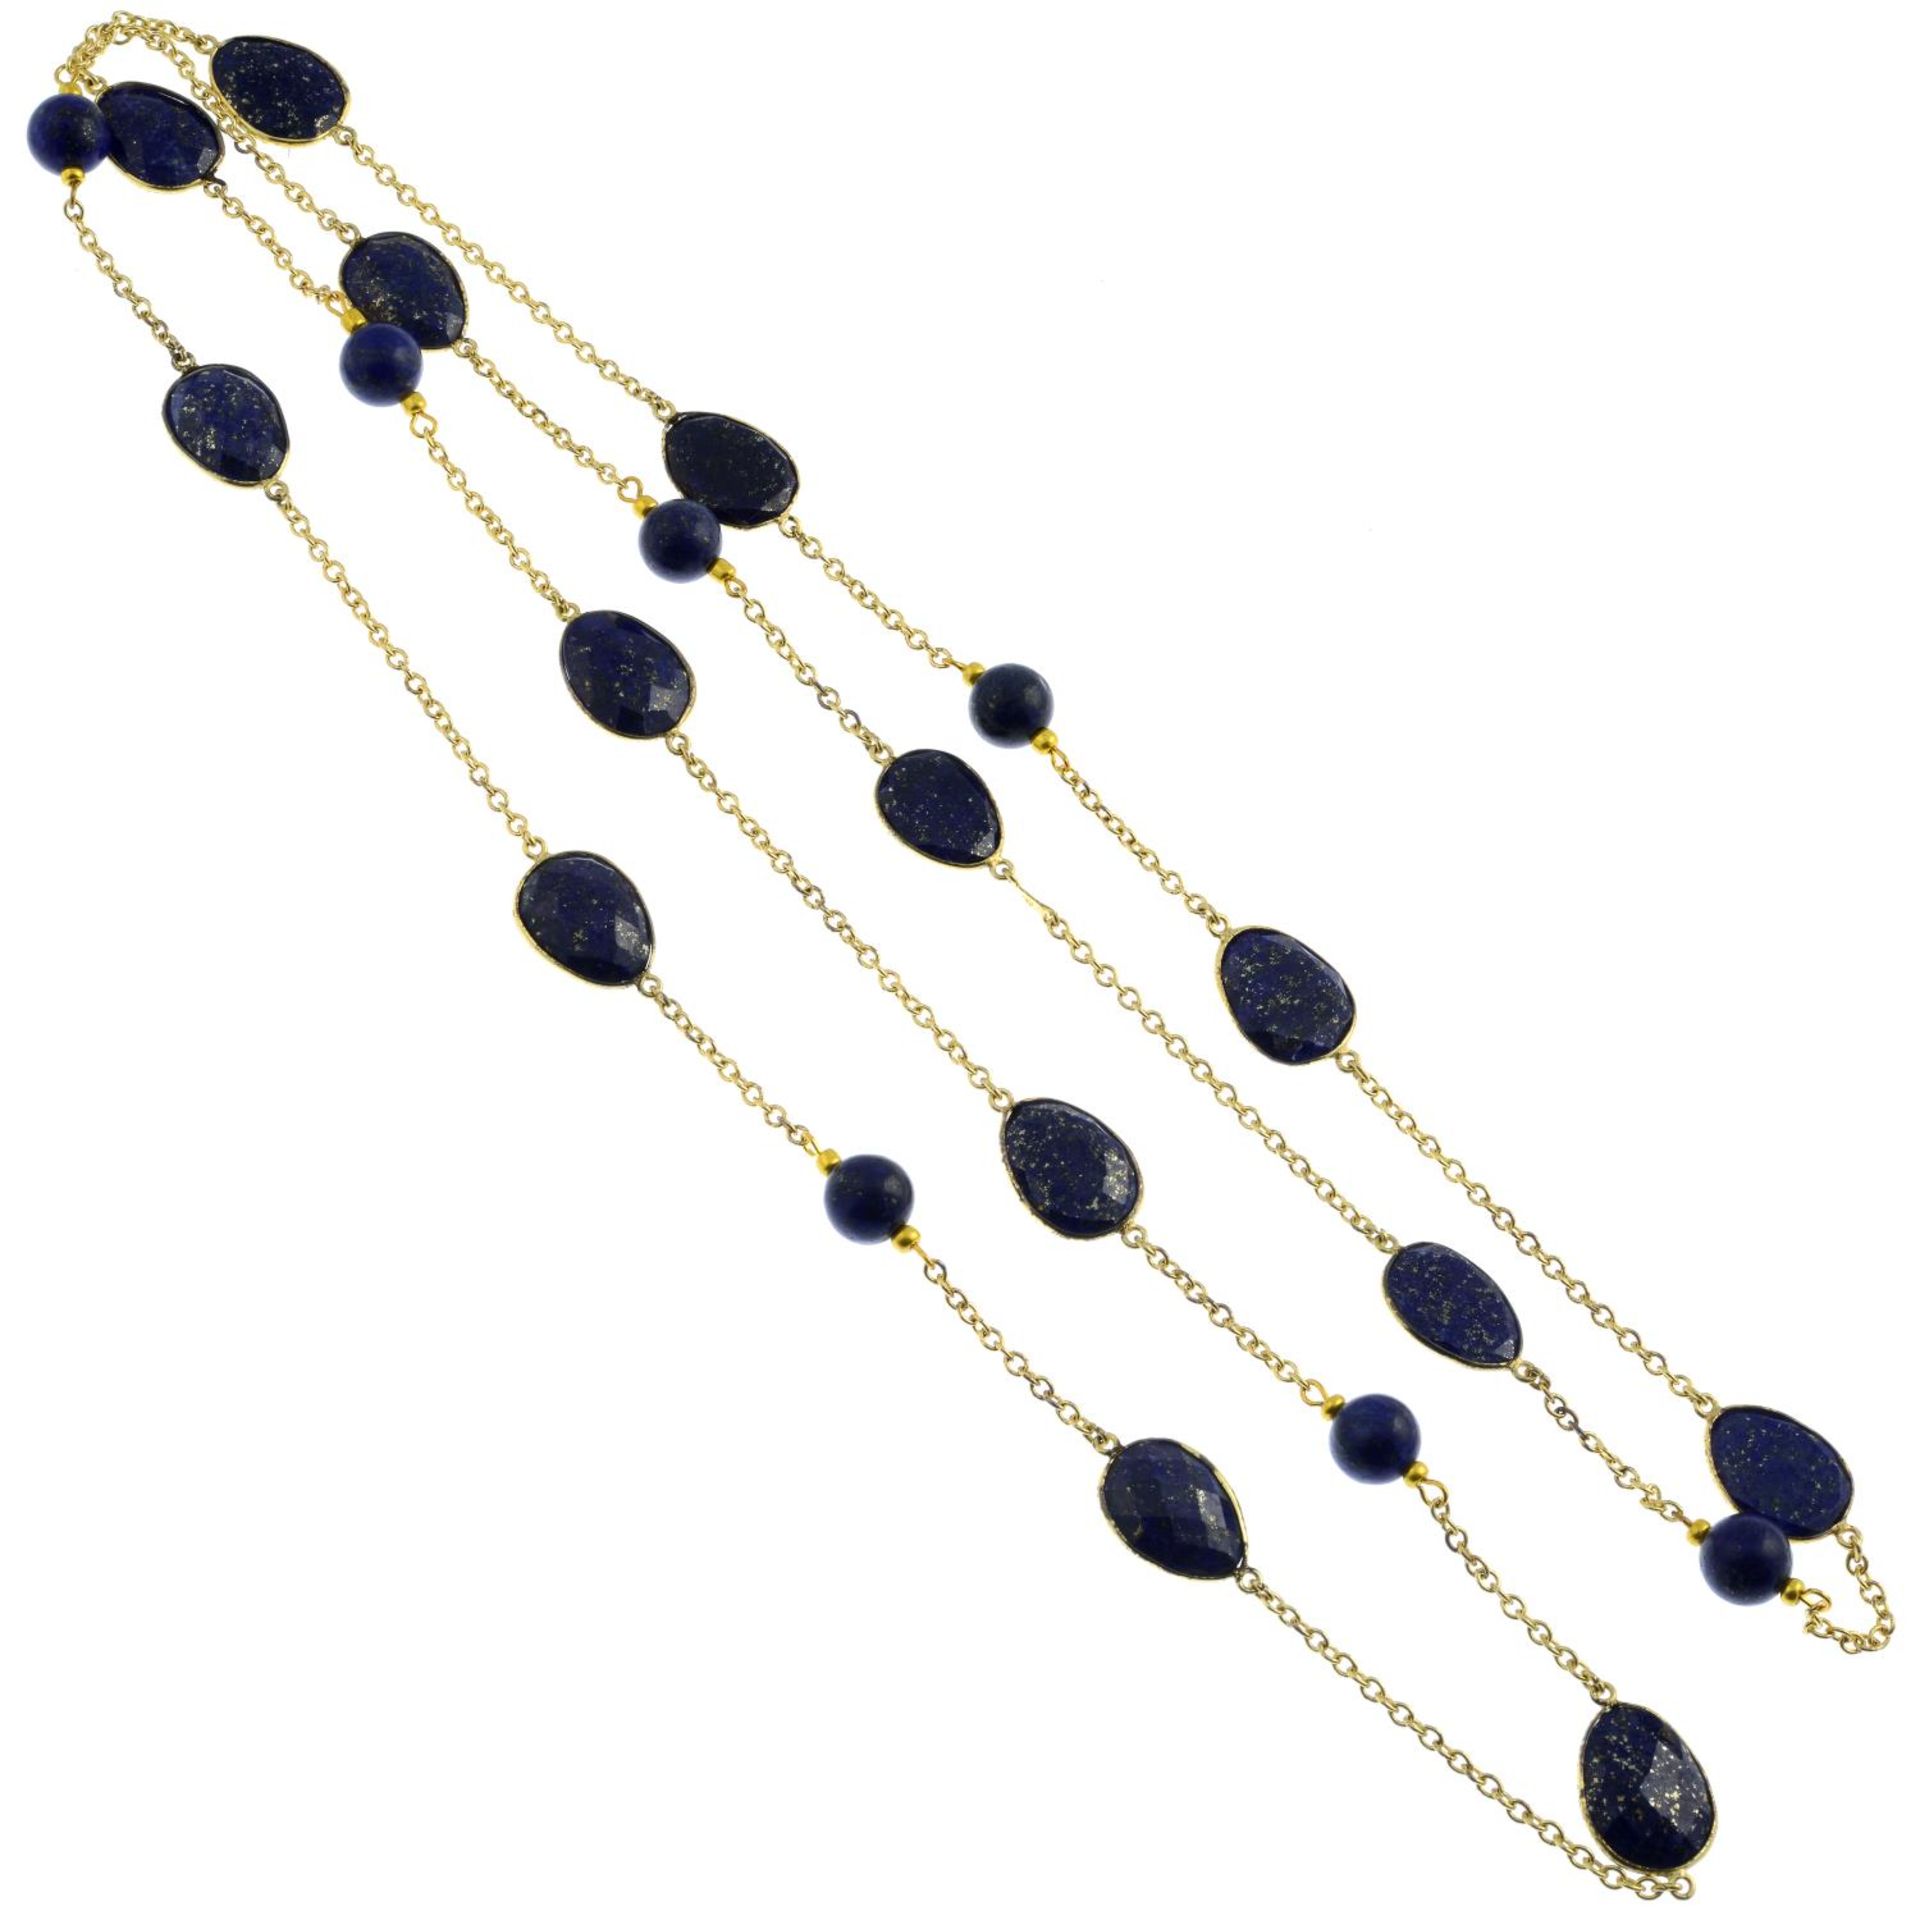 A lapis lazuli necklace and earrings.Earrings stamped 925.Length of necklace 124cms. - Image 2 of 2